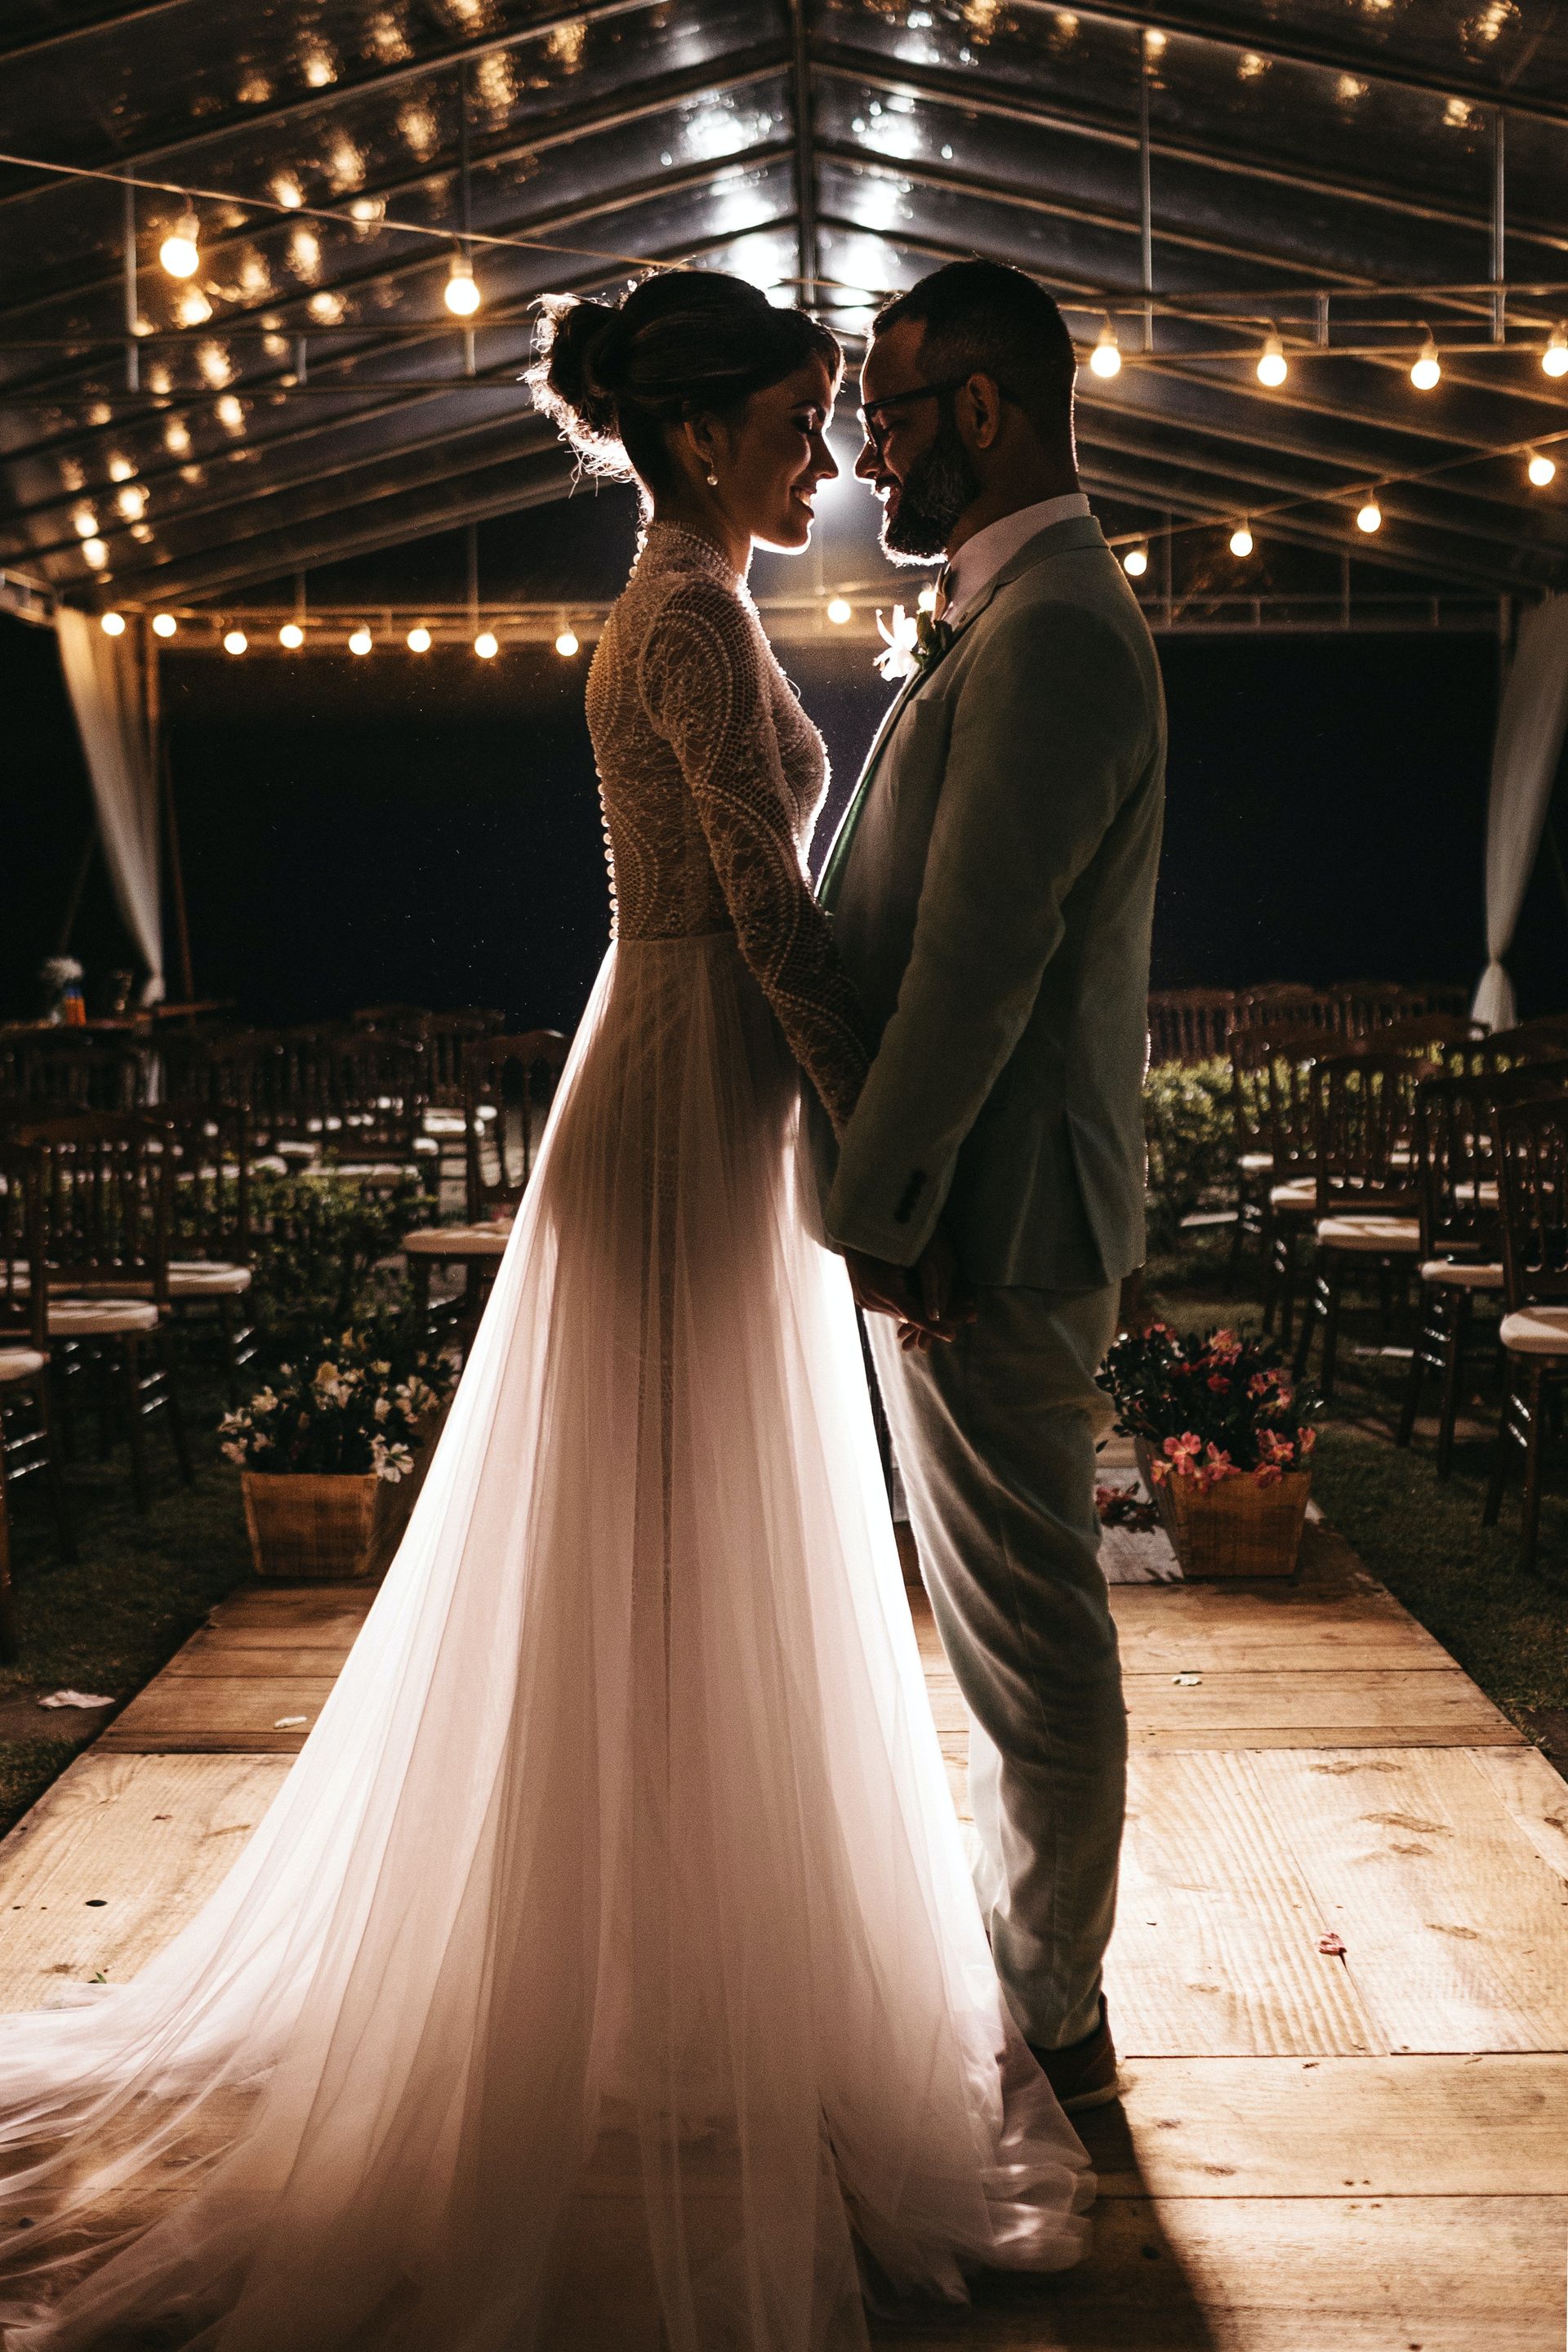 A couple standing at the altar with festoon lighting behind them